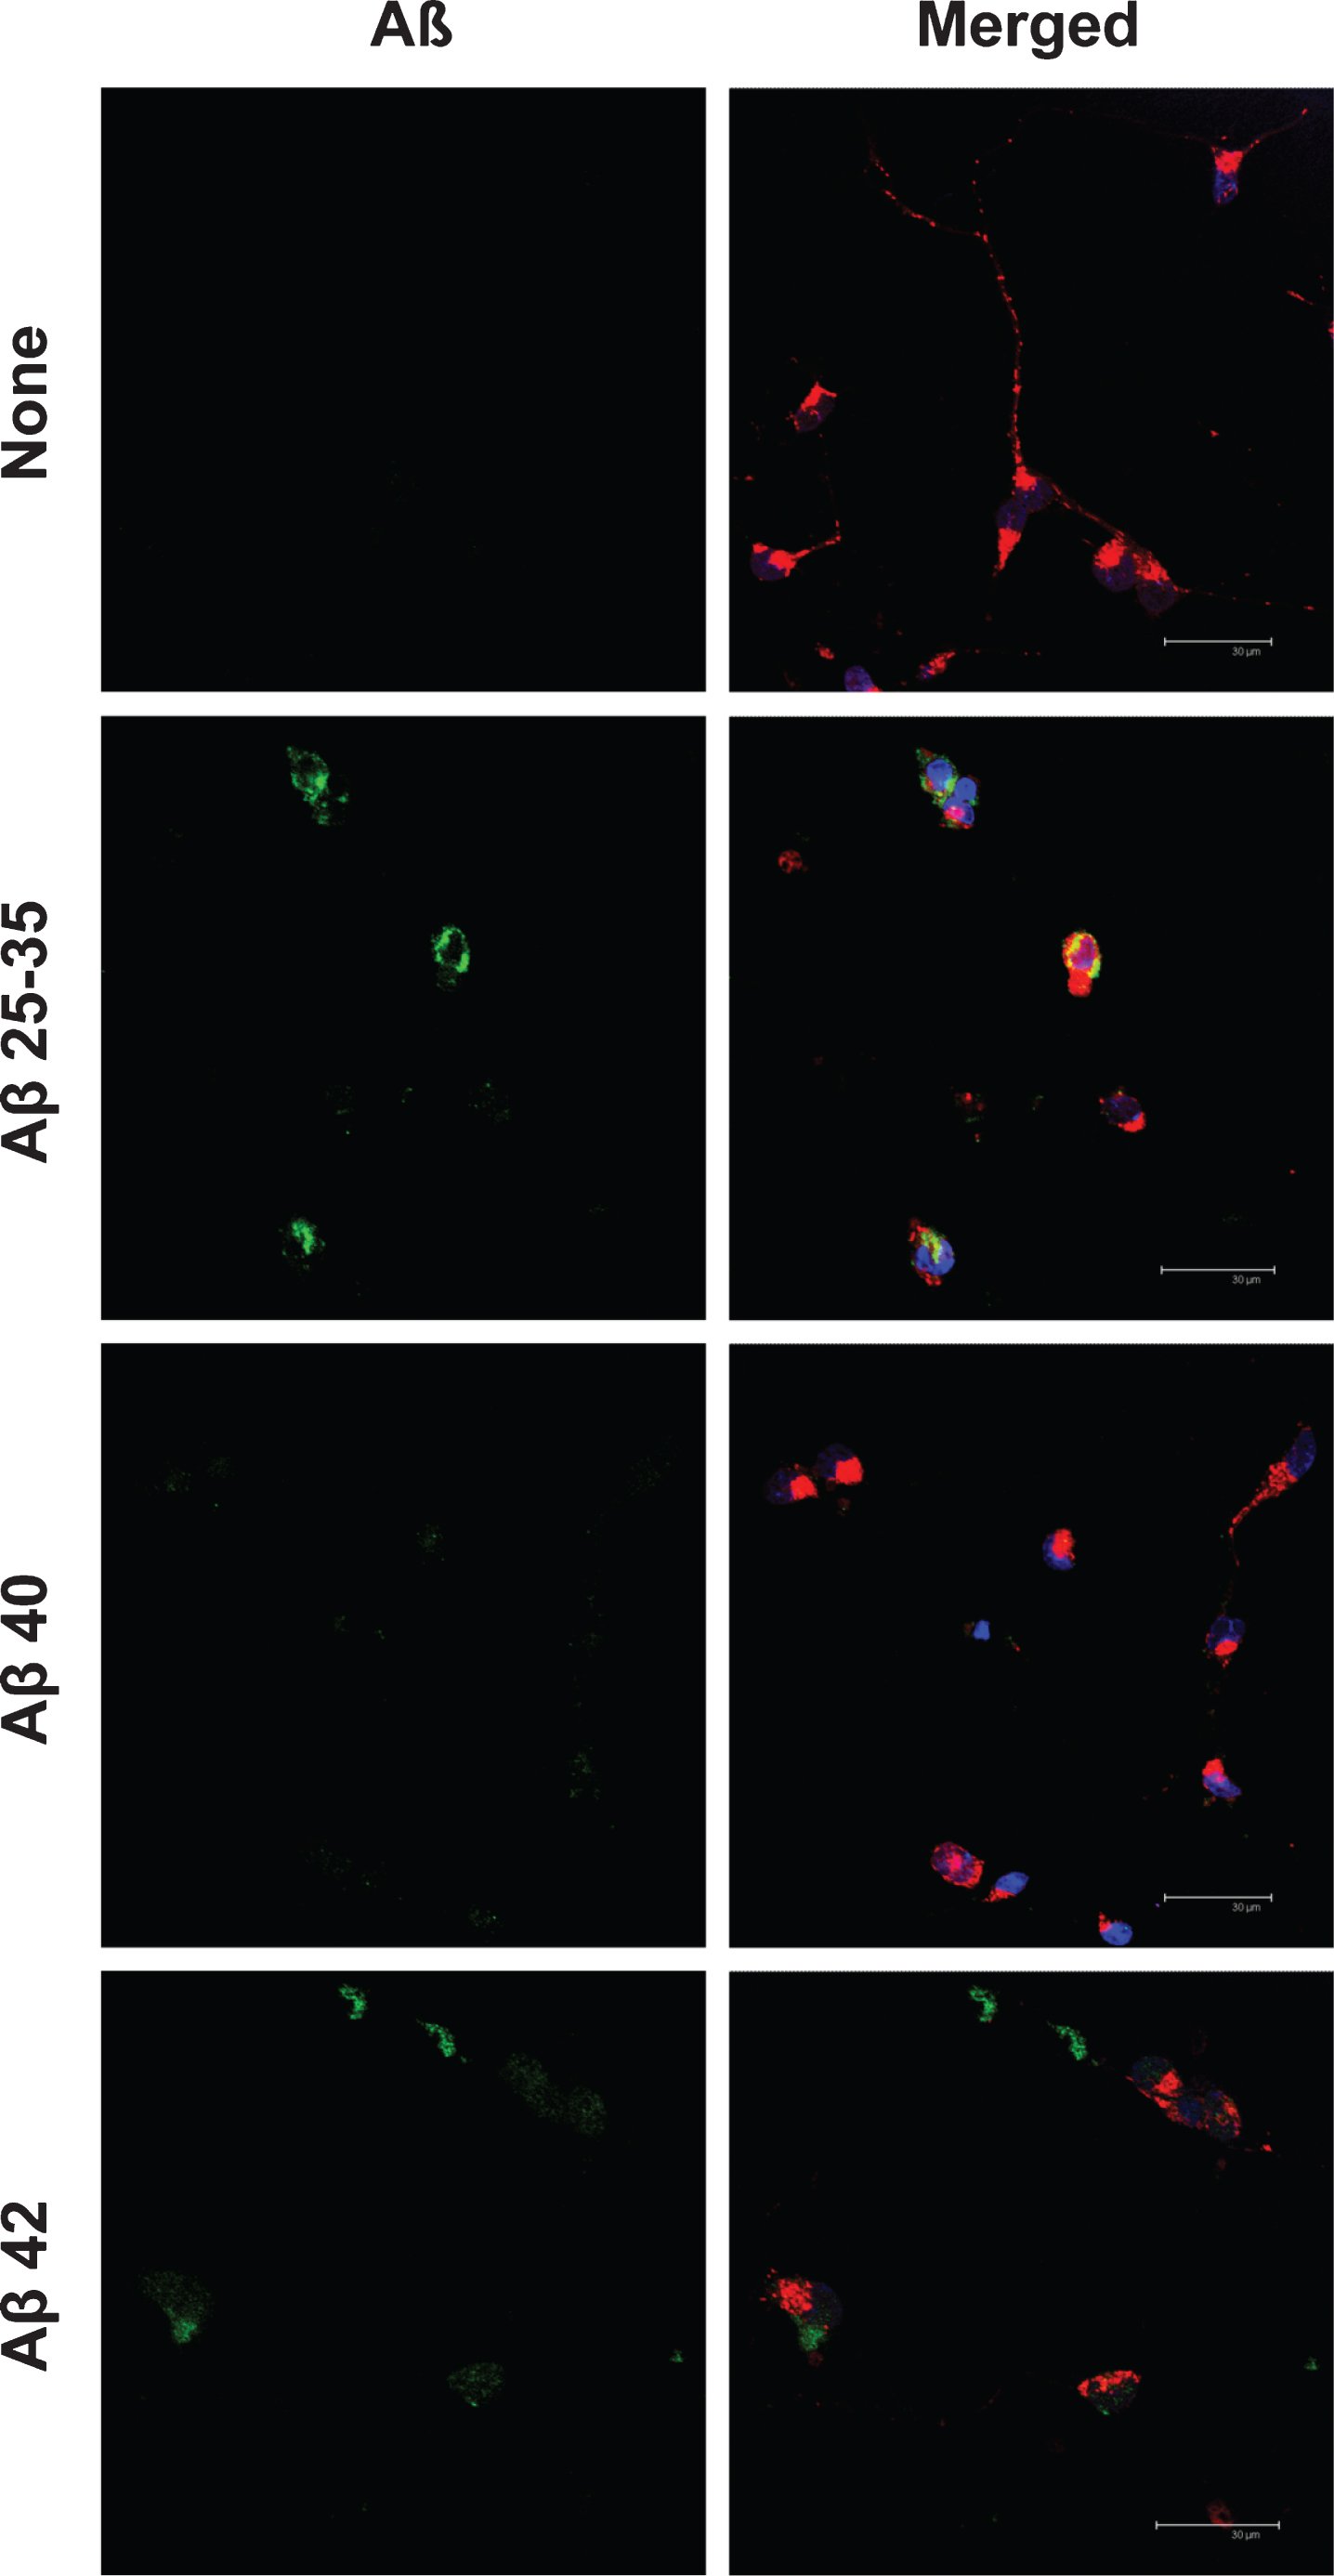 Cellular localization of amyloid-beta peptides in neurons in primary culture. Neurons in primary culture (3 DIV) were incubated for 5 h in Hanks medium with three different Aβ peptides: Aβ25-35, Aβ40, or Aβ42 (30 μM). After incubation, neurons were stained with MitotrakerRed, a mitochondrial marker (in red) and then were fixed. Immunocytochemistry against each Aβ was performed (in green) and nuclei were stained with TOPRO (in blue). Images were taken using confocal microscopy. Scale bar: 30 μm.